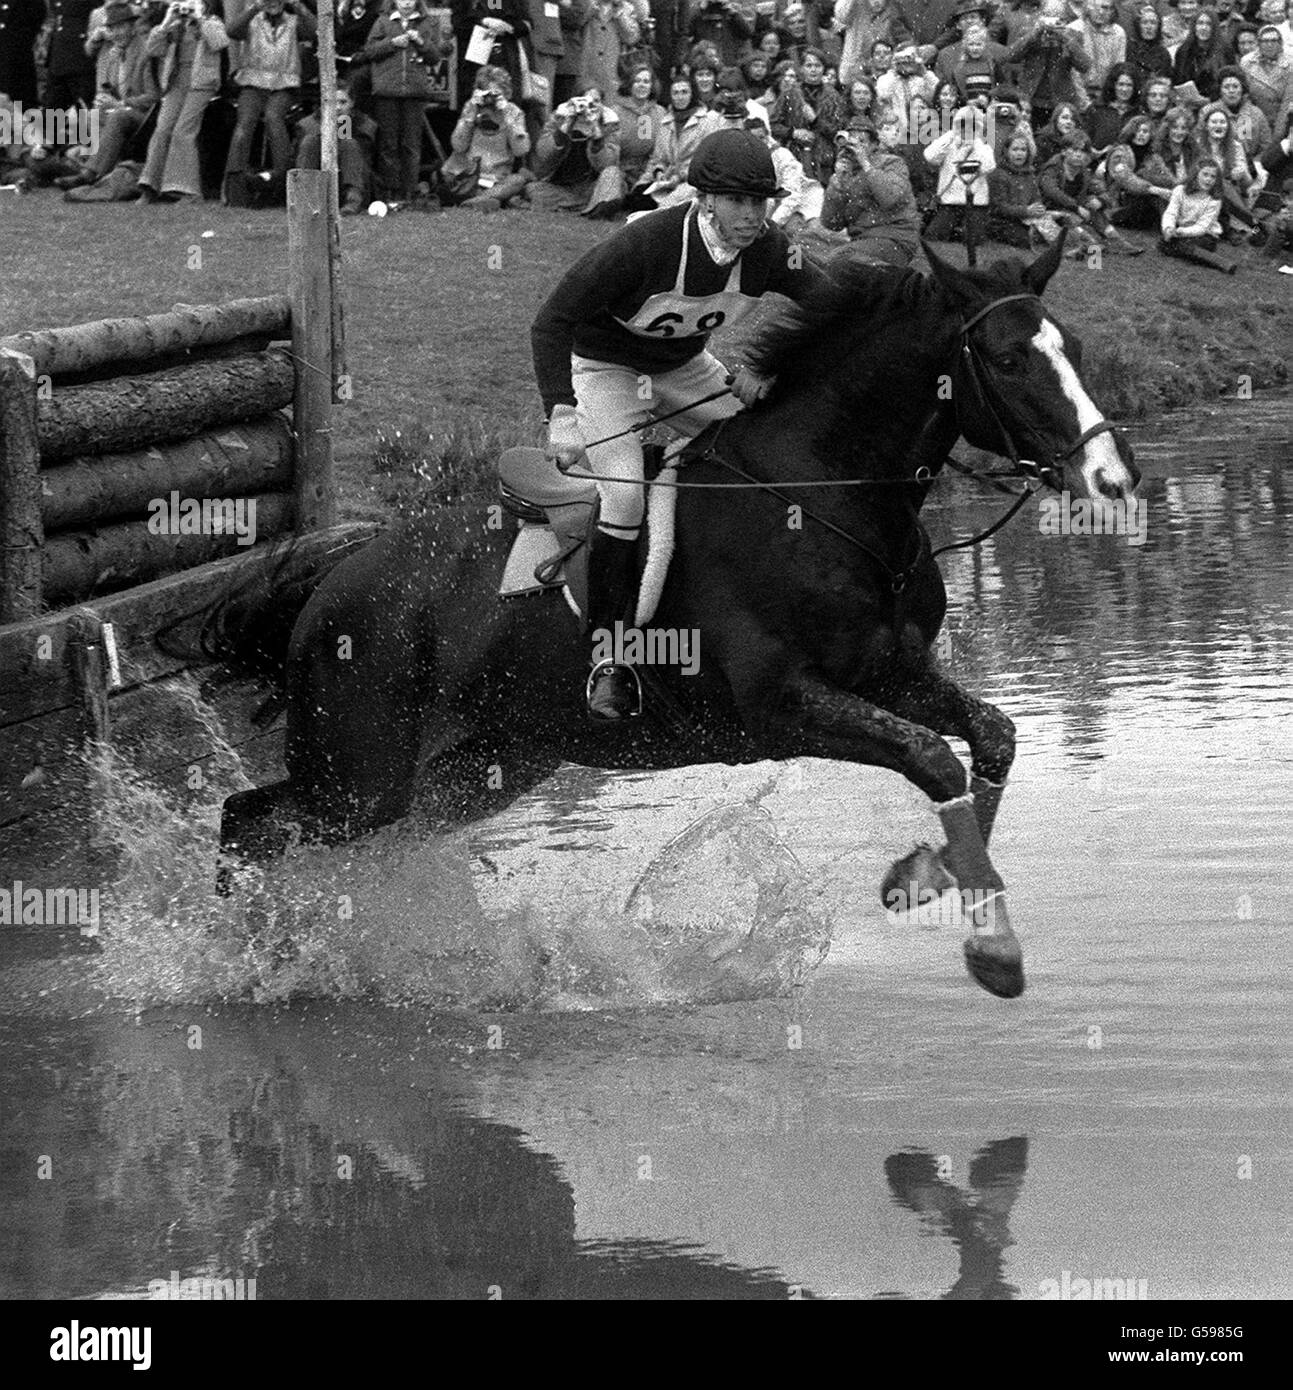 Princess Anne up on Goodwill, takes the water-jump during the cross-country event of the Badminton Horse Trials. Her round went off without mishap and she is well placed to improve her position in the final show jumping test if the riders above her pick up faults. The event was watched by The Queen, Prince Philip and other members of the Royal Family. Stock Photo